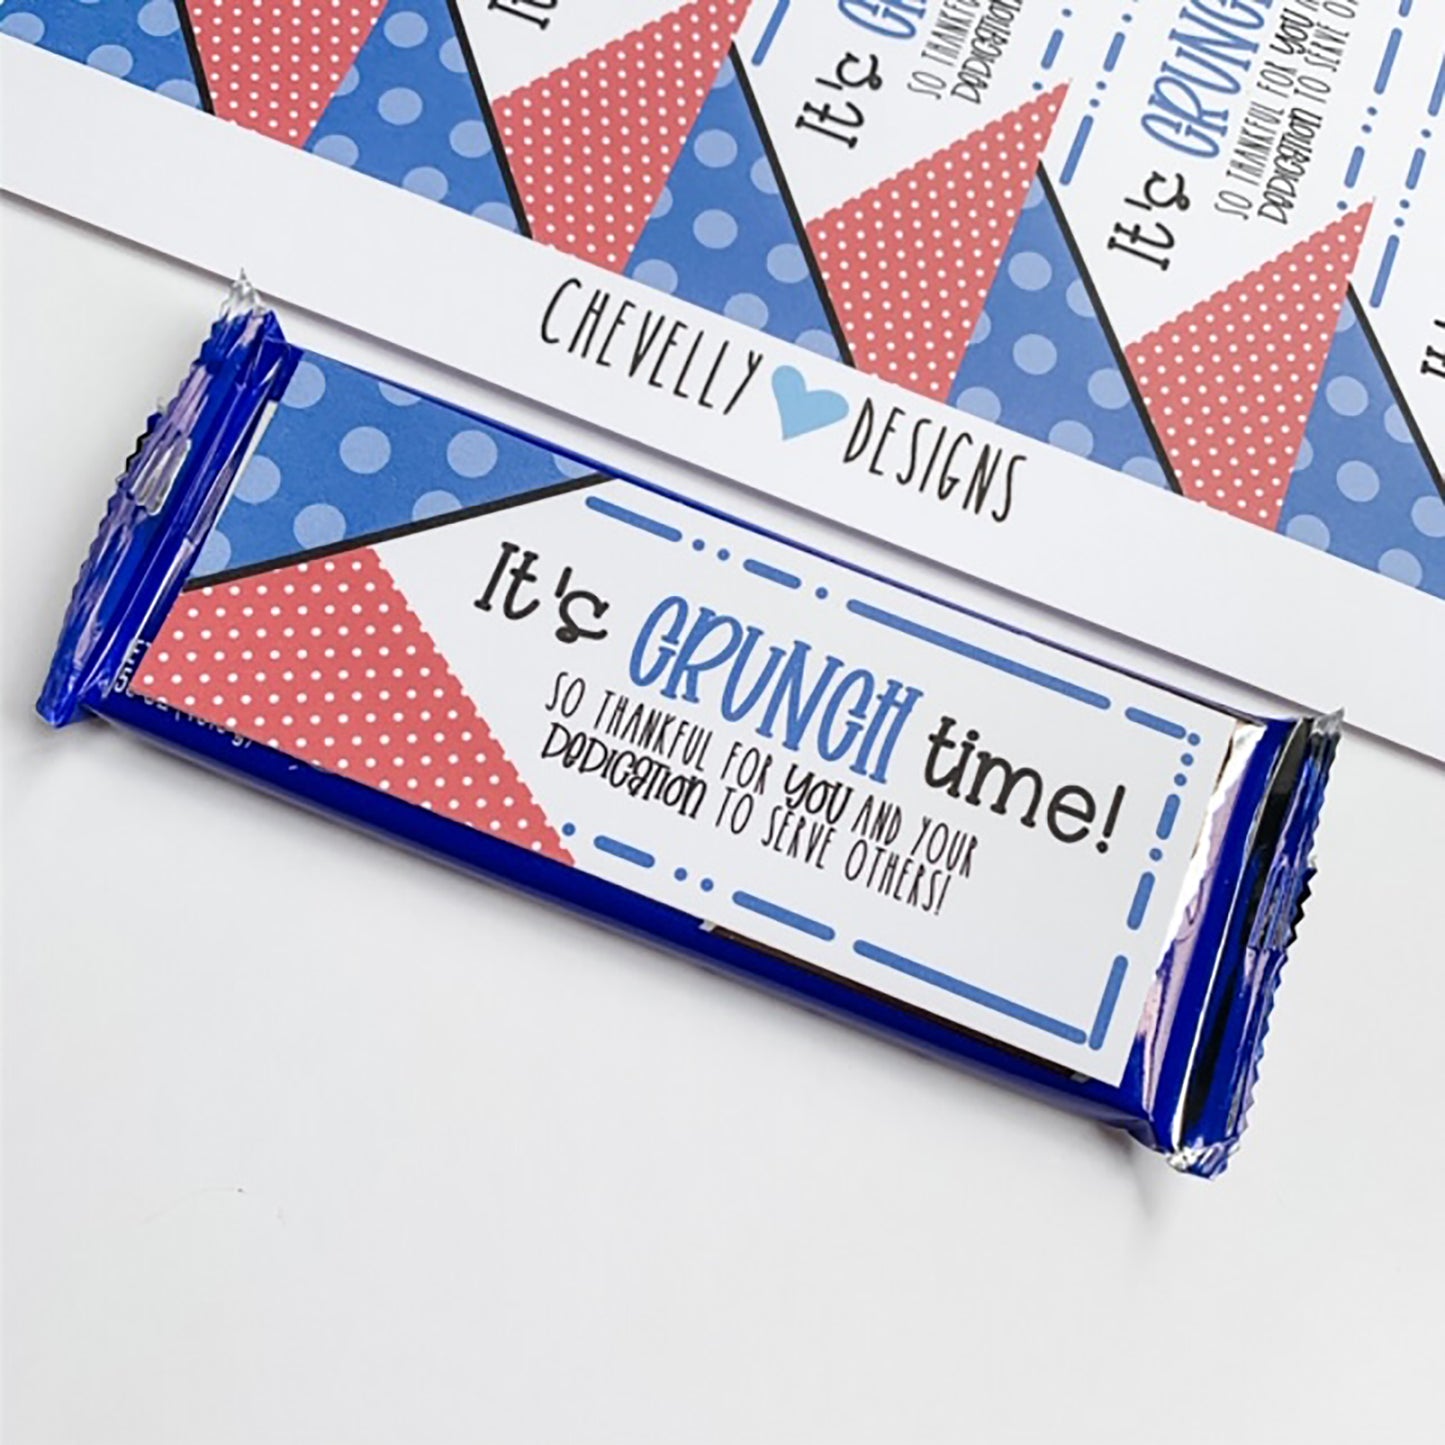 "It's CRUNCH time" - Printable Appreciation Gift Tags for candy bars | Printable - Instant Digital Download